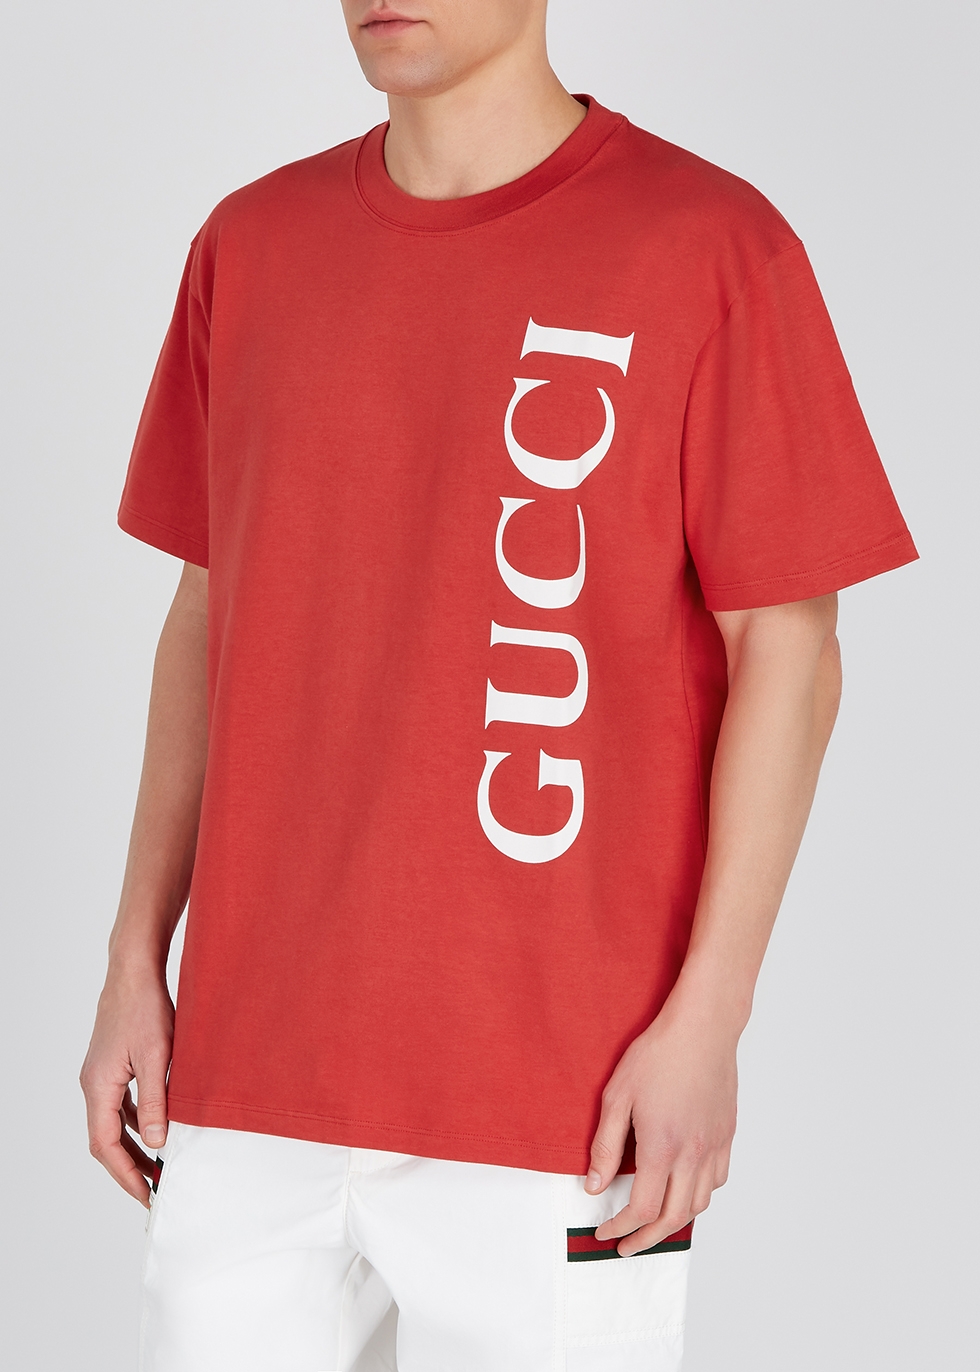 gucci red top